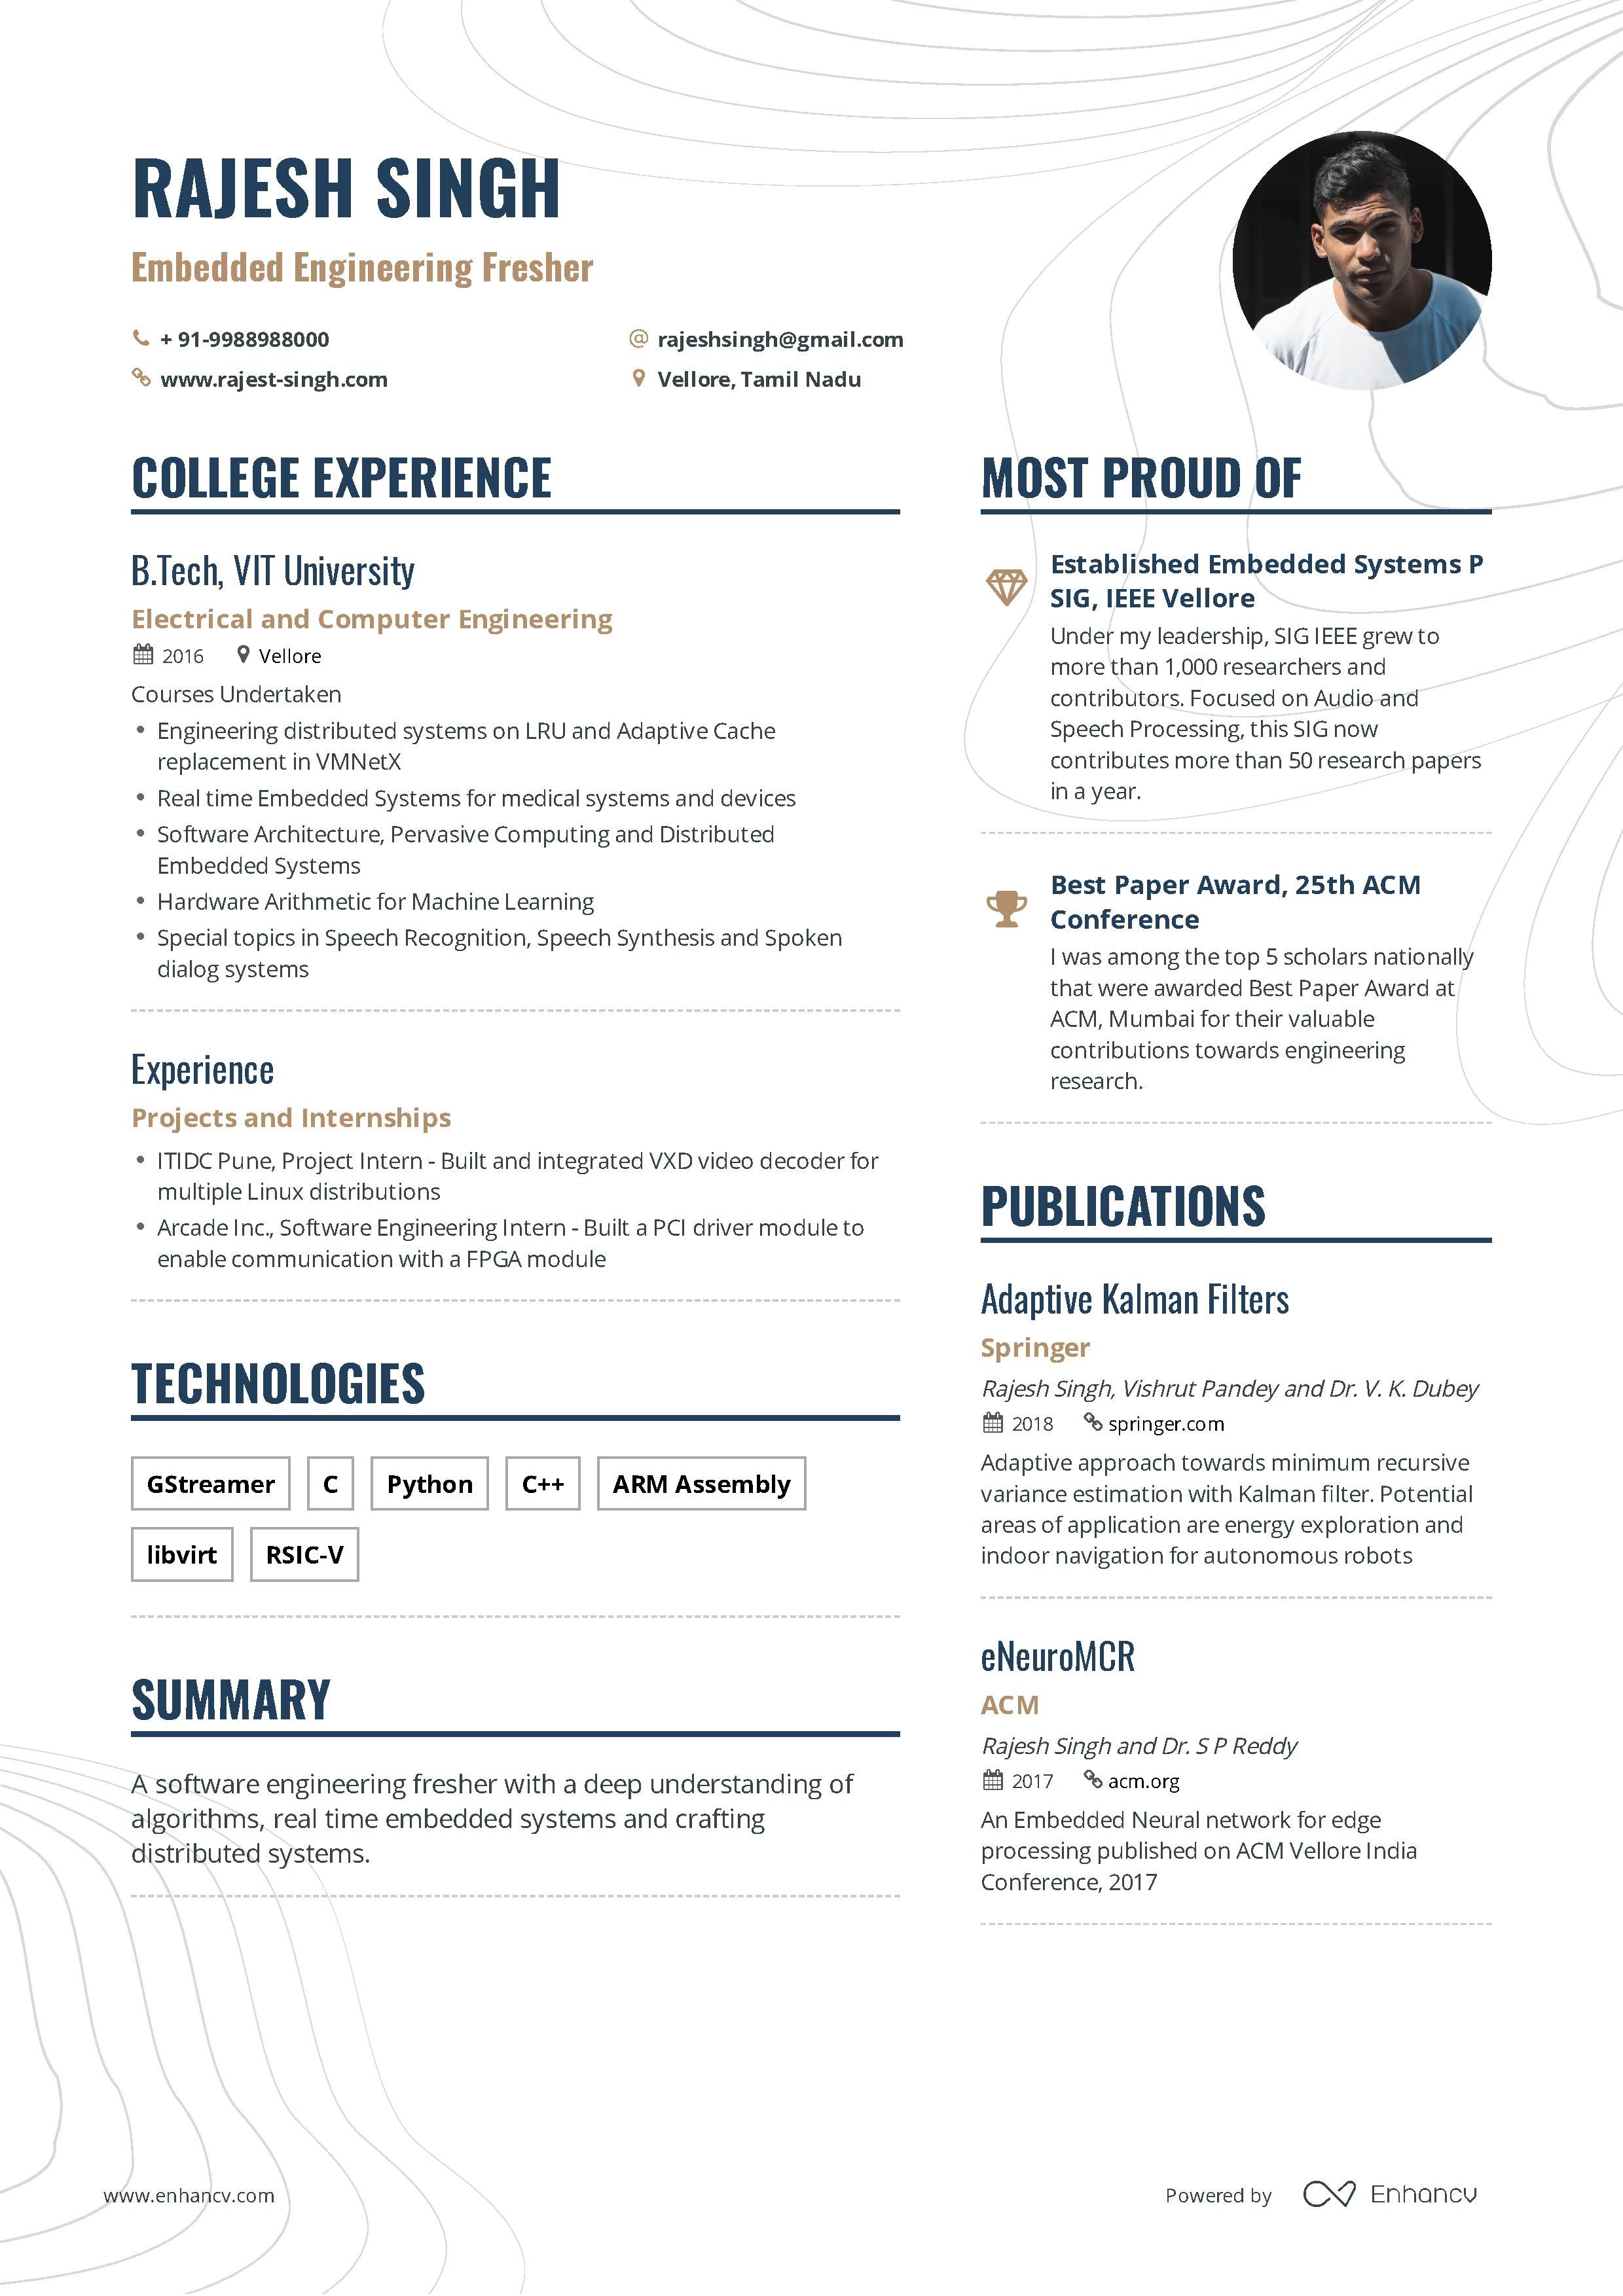 The ultimate interns and freshers resume format guide for 2019 Job